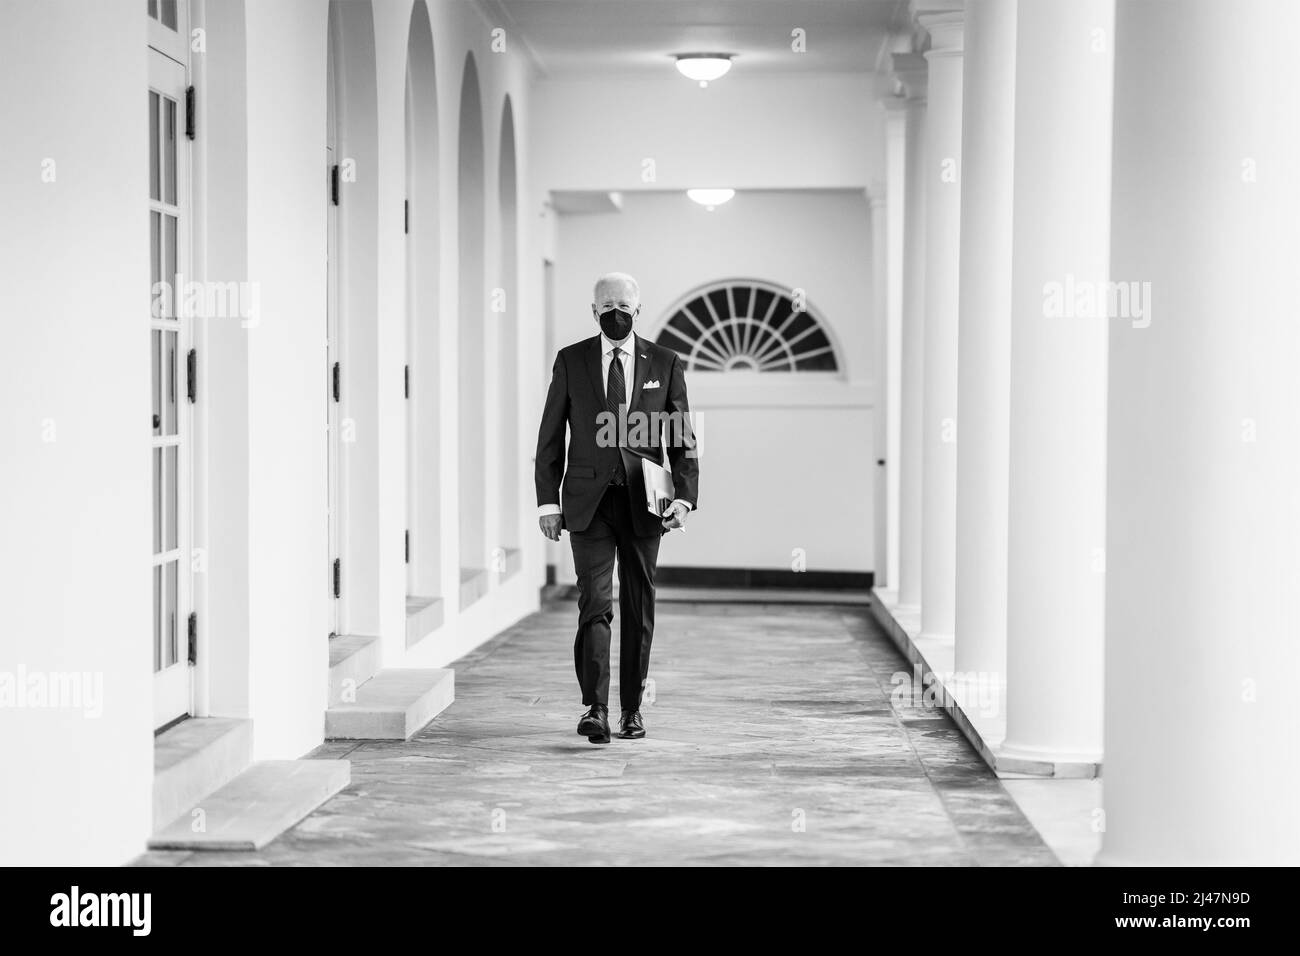 Washington, United States of America. 20 January, 2022. U.S President Joe Biden walks to the Oval Office throughout the West Colonnade of the White House January 20, 2022 in Washington, D.C.  Credit: Adam Schultz/White House Photo/Alamy Live News Stock Photo